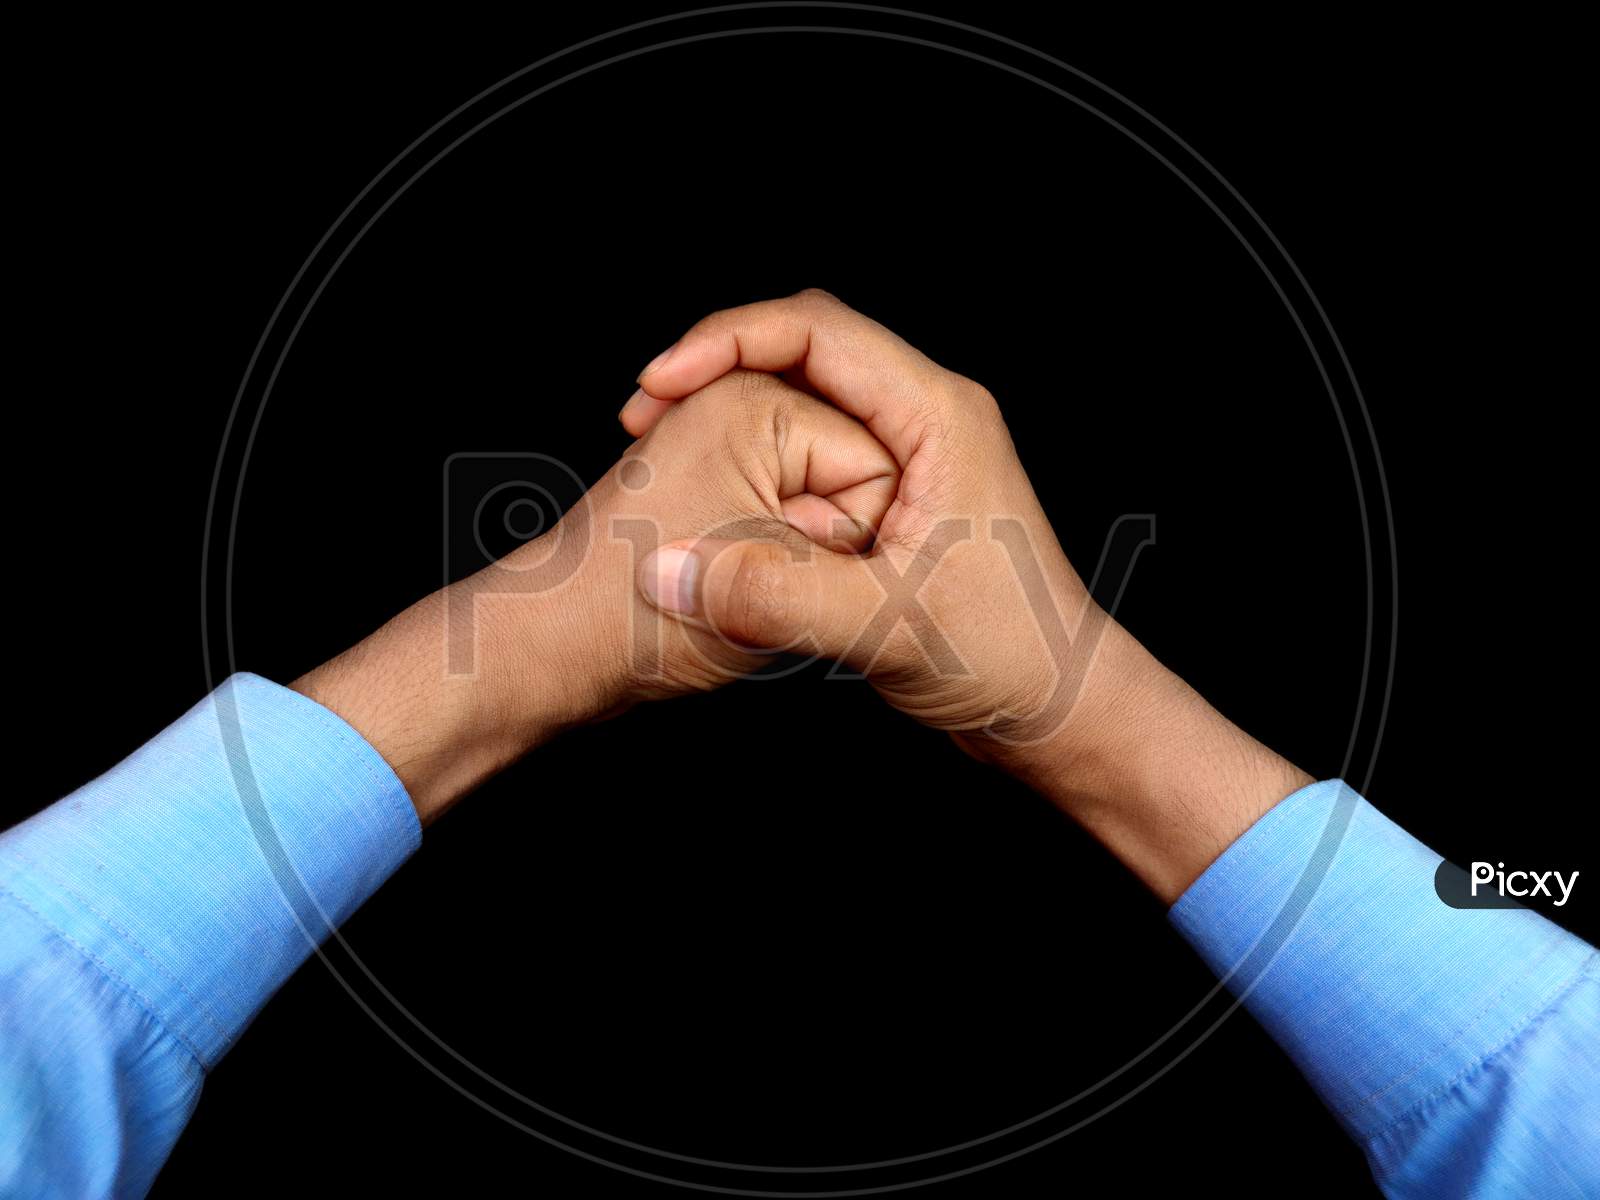 Hand holding Hand , support bonding togetherness Concept, white background